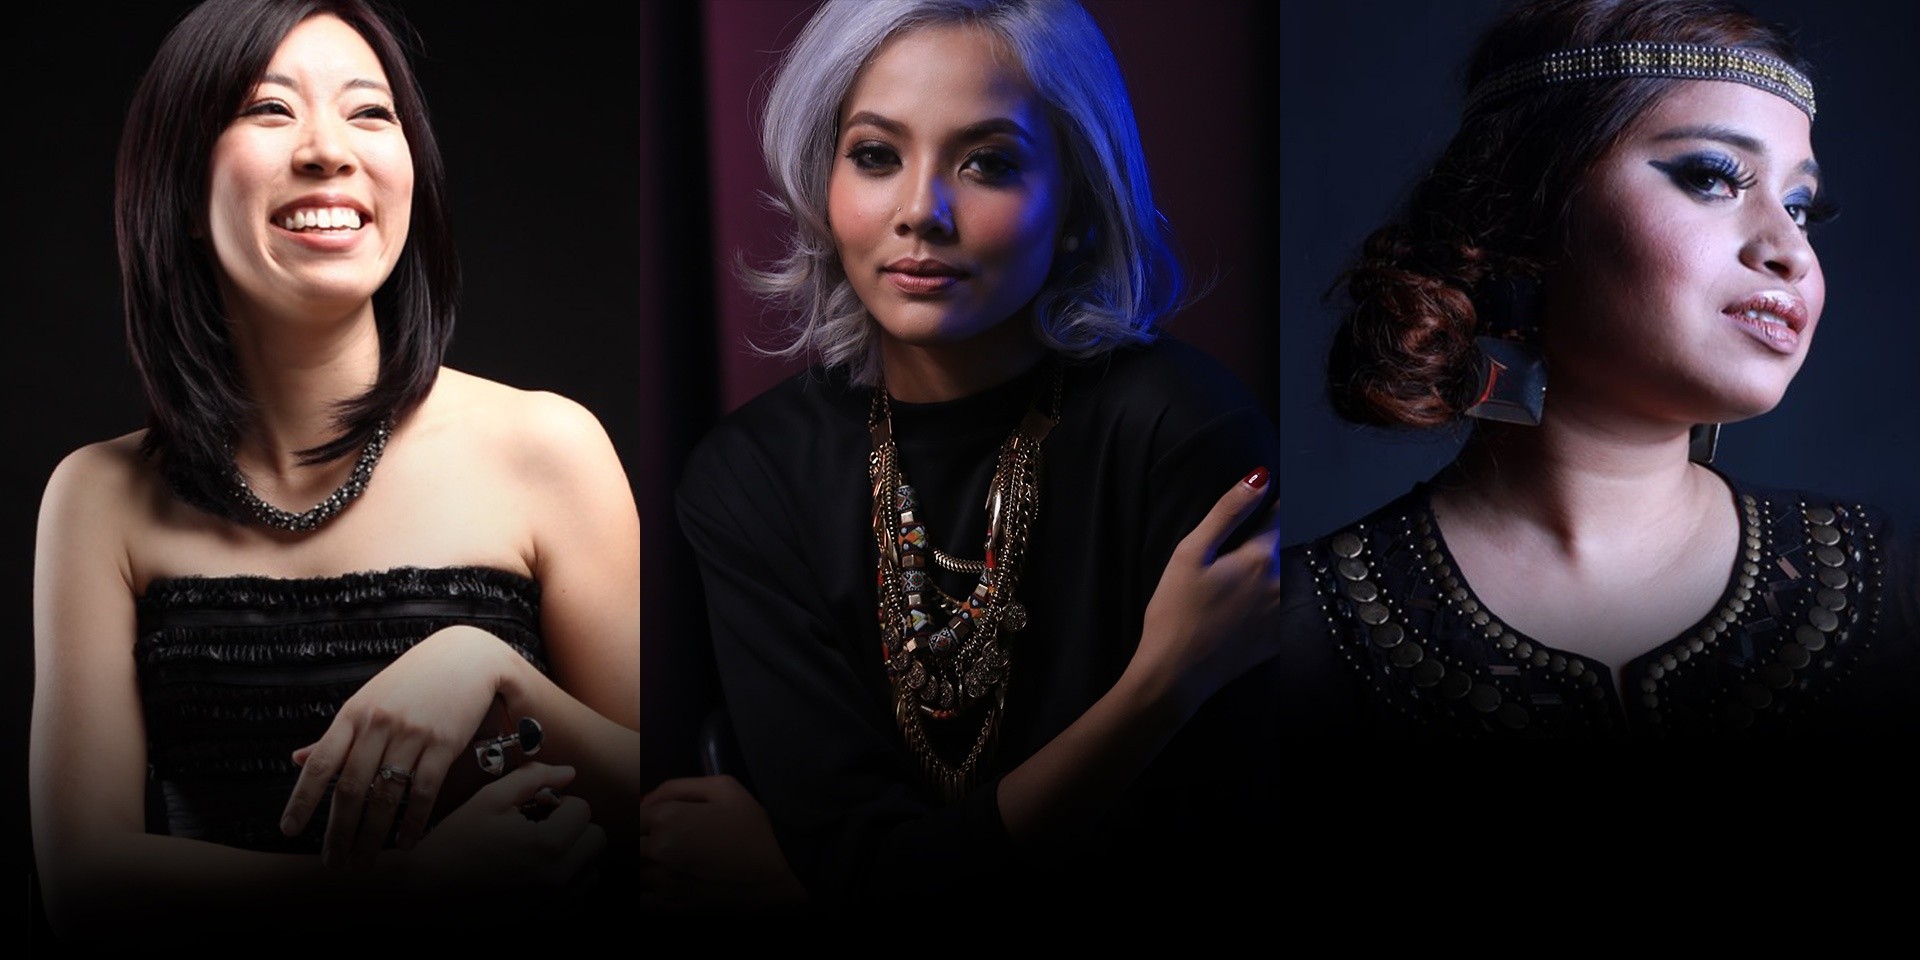 Corrinne May to perform at Marina Bay Sands with Aisyah Aziz and Roze Kasmani